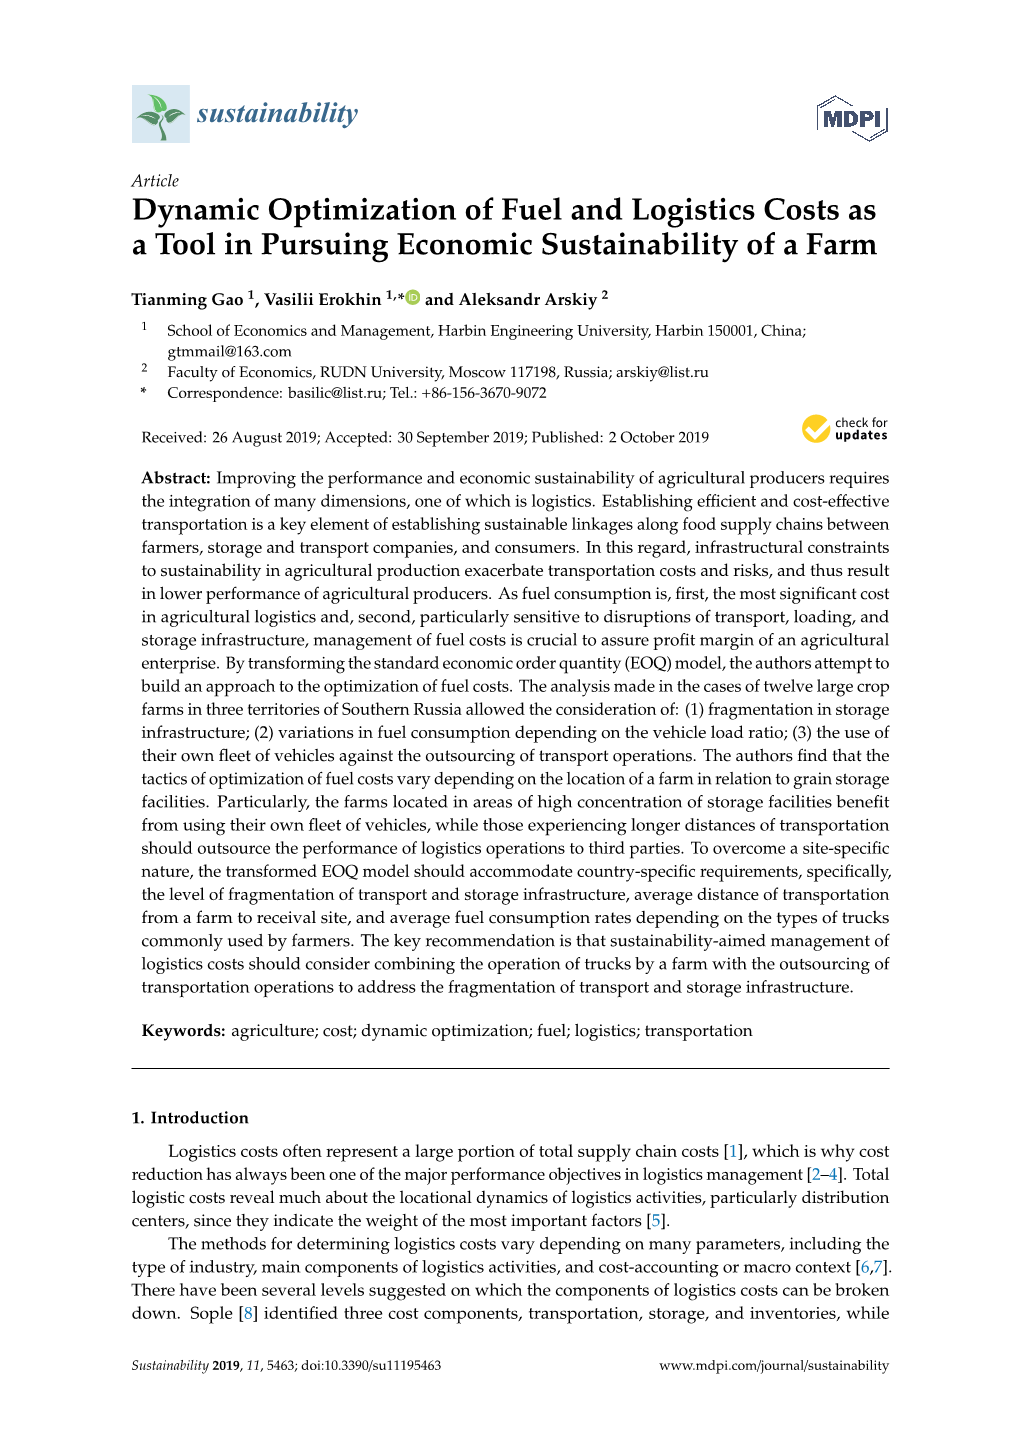 Dynamic Optimization of Fuel and Logistics Costs As a Tool in Pursuing Economic Sustainability of a Farm